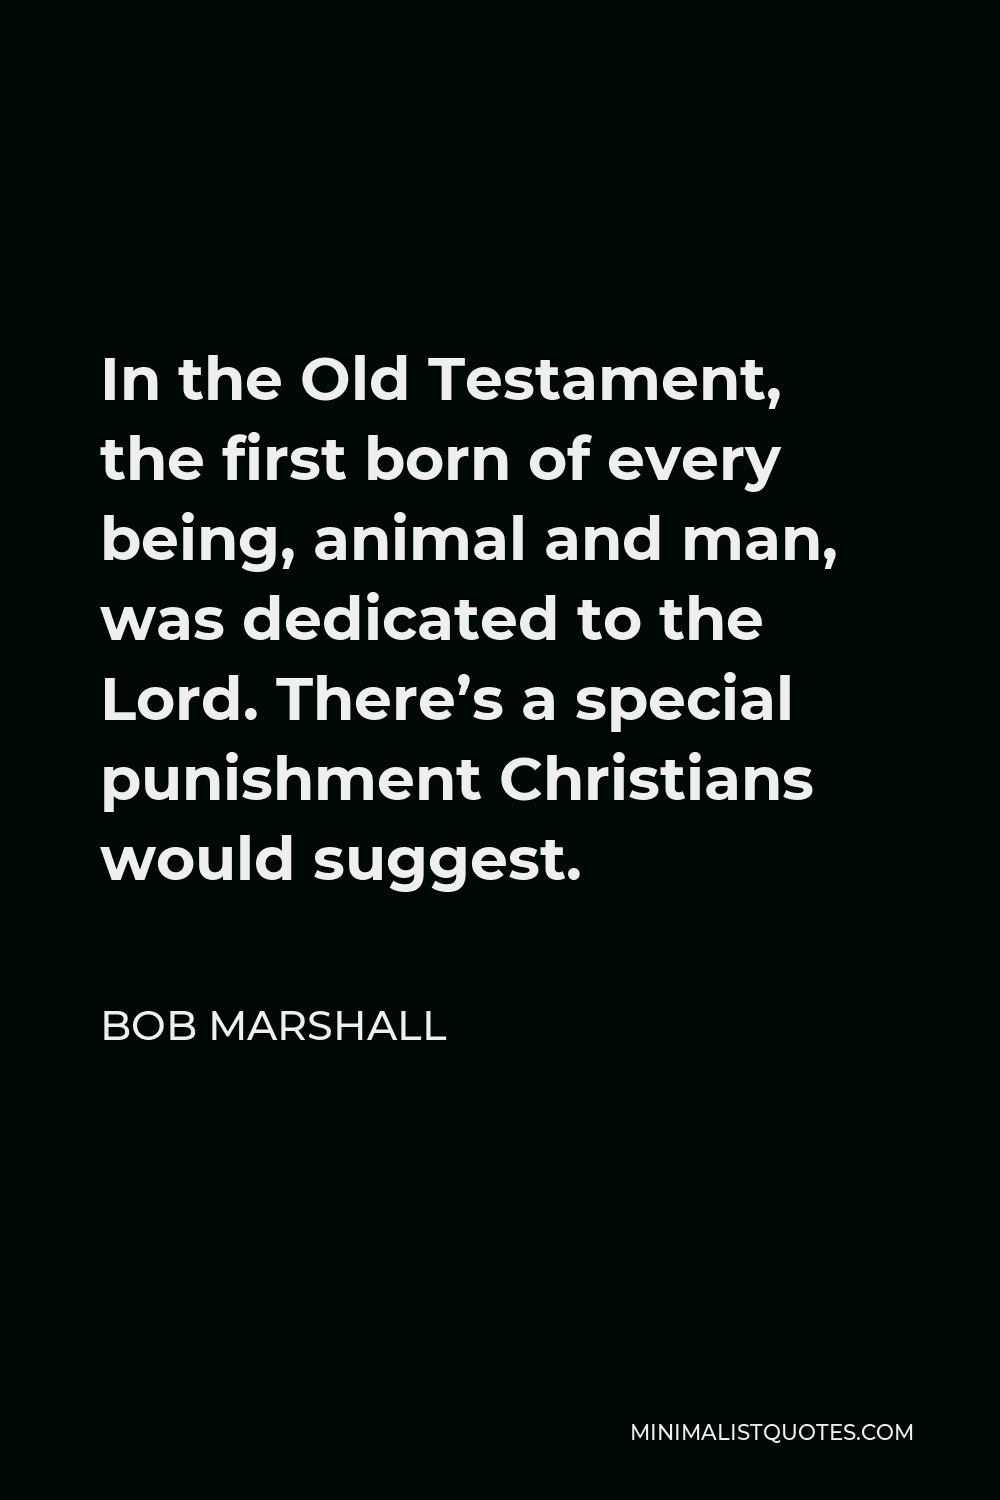 Bob Marshall Quote - In the Old Testament, the first born of every being, animal and man, was dedicated to the Lord. There’s a special punishment Christians would suggest.